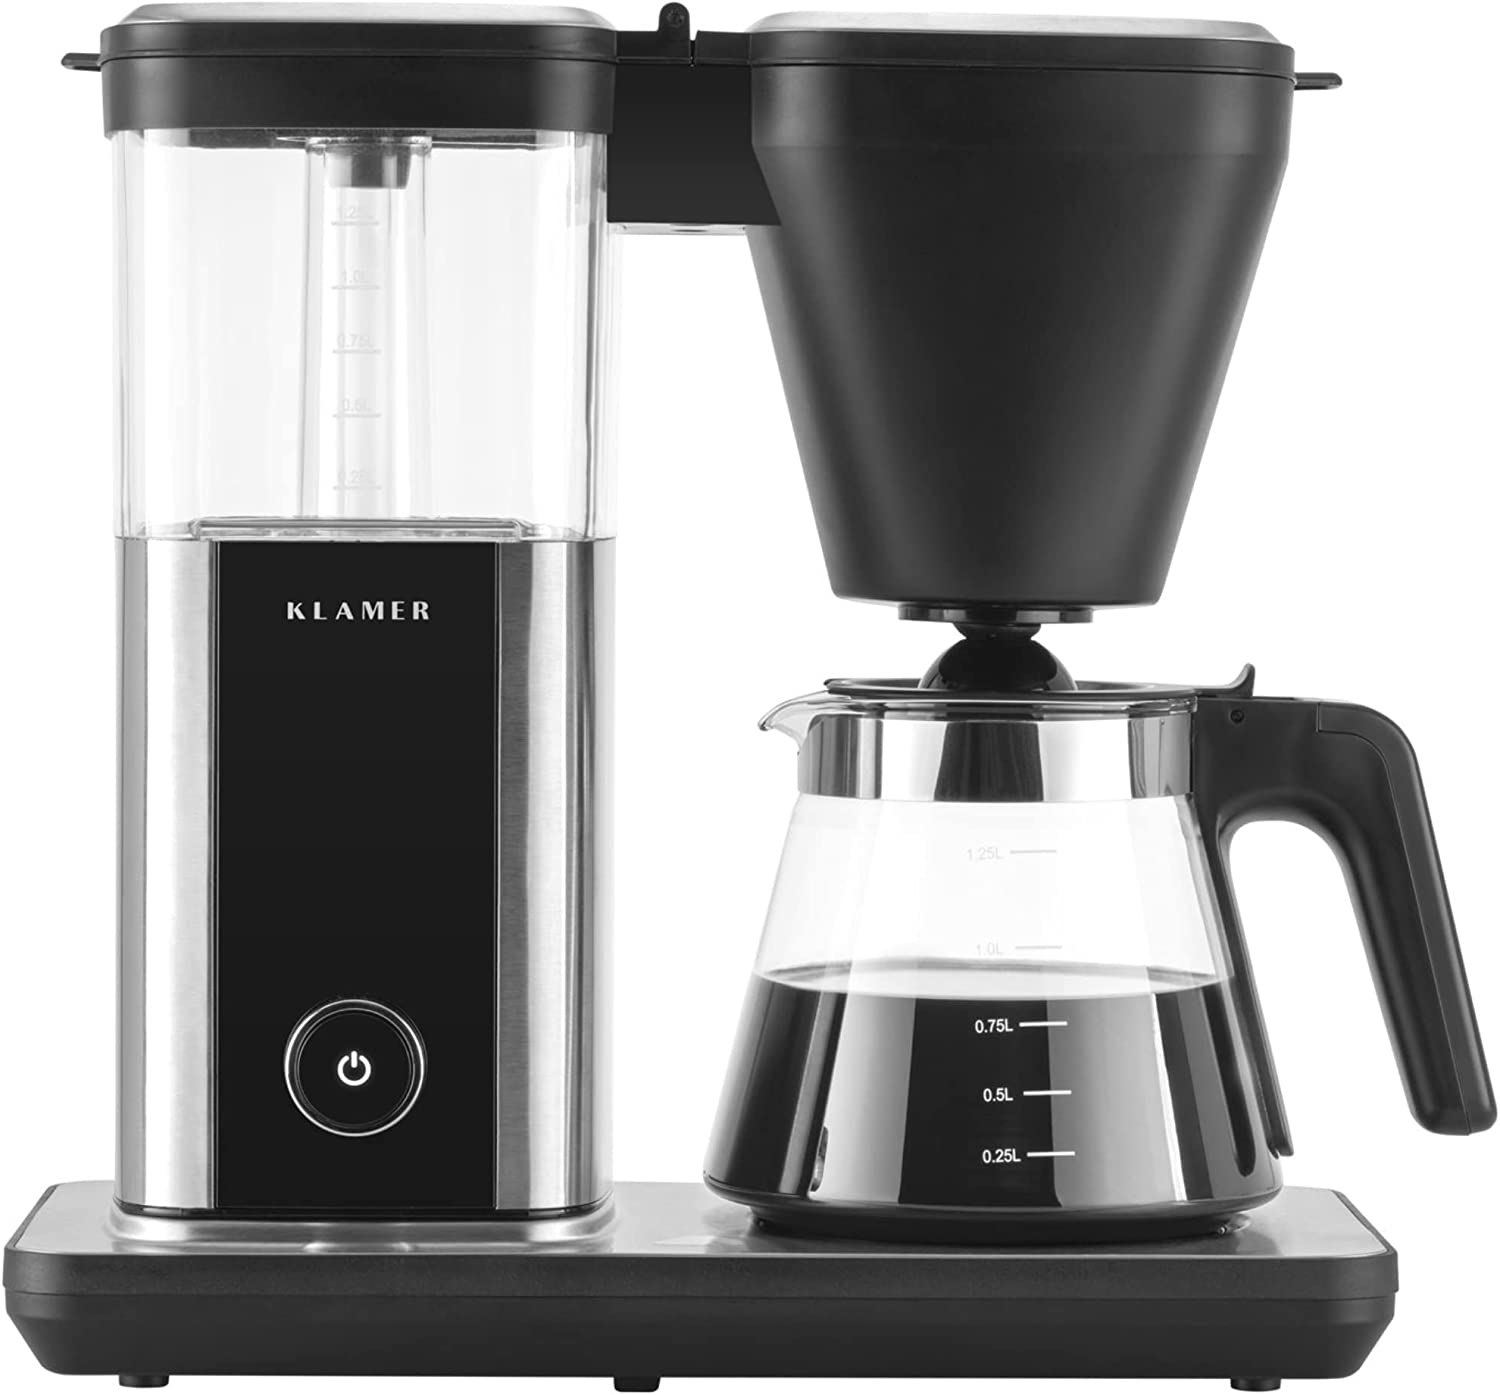 KLAMER Coffee machine with glass jug, coffee maker with 1.25 L capacity, 1550 W filter coffee machine for a maximum of 10 cups